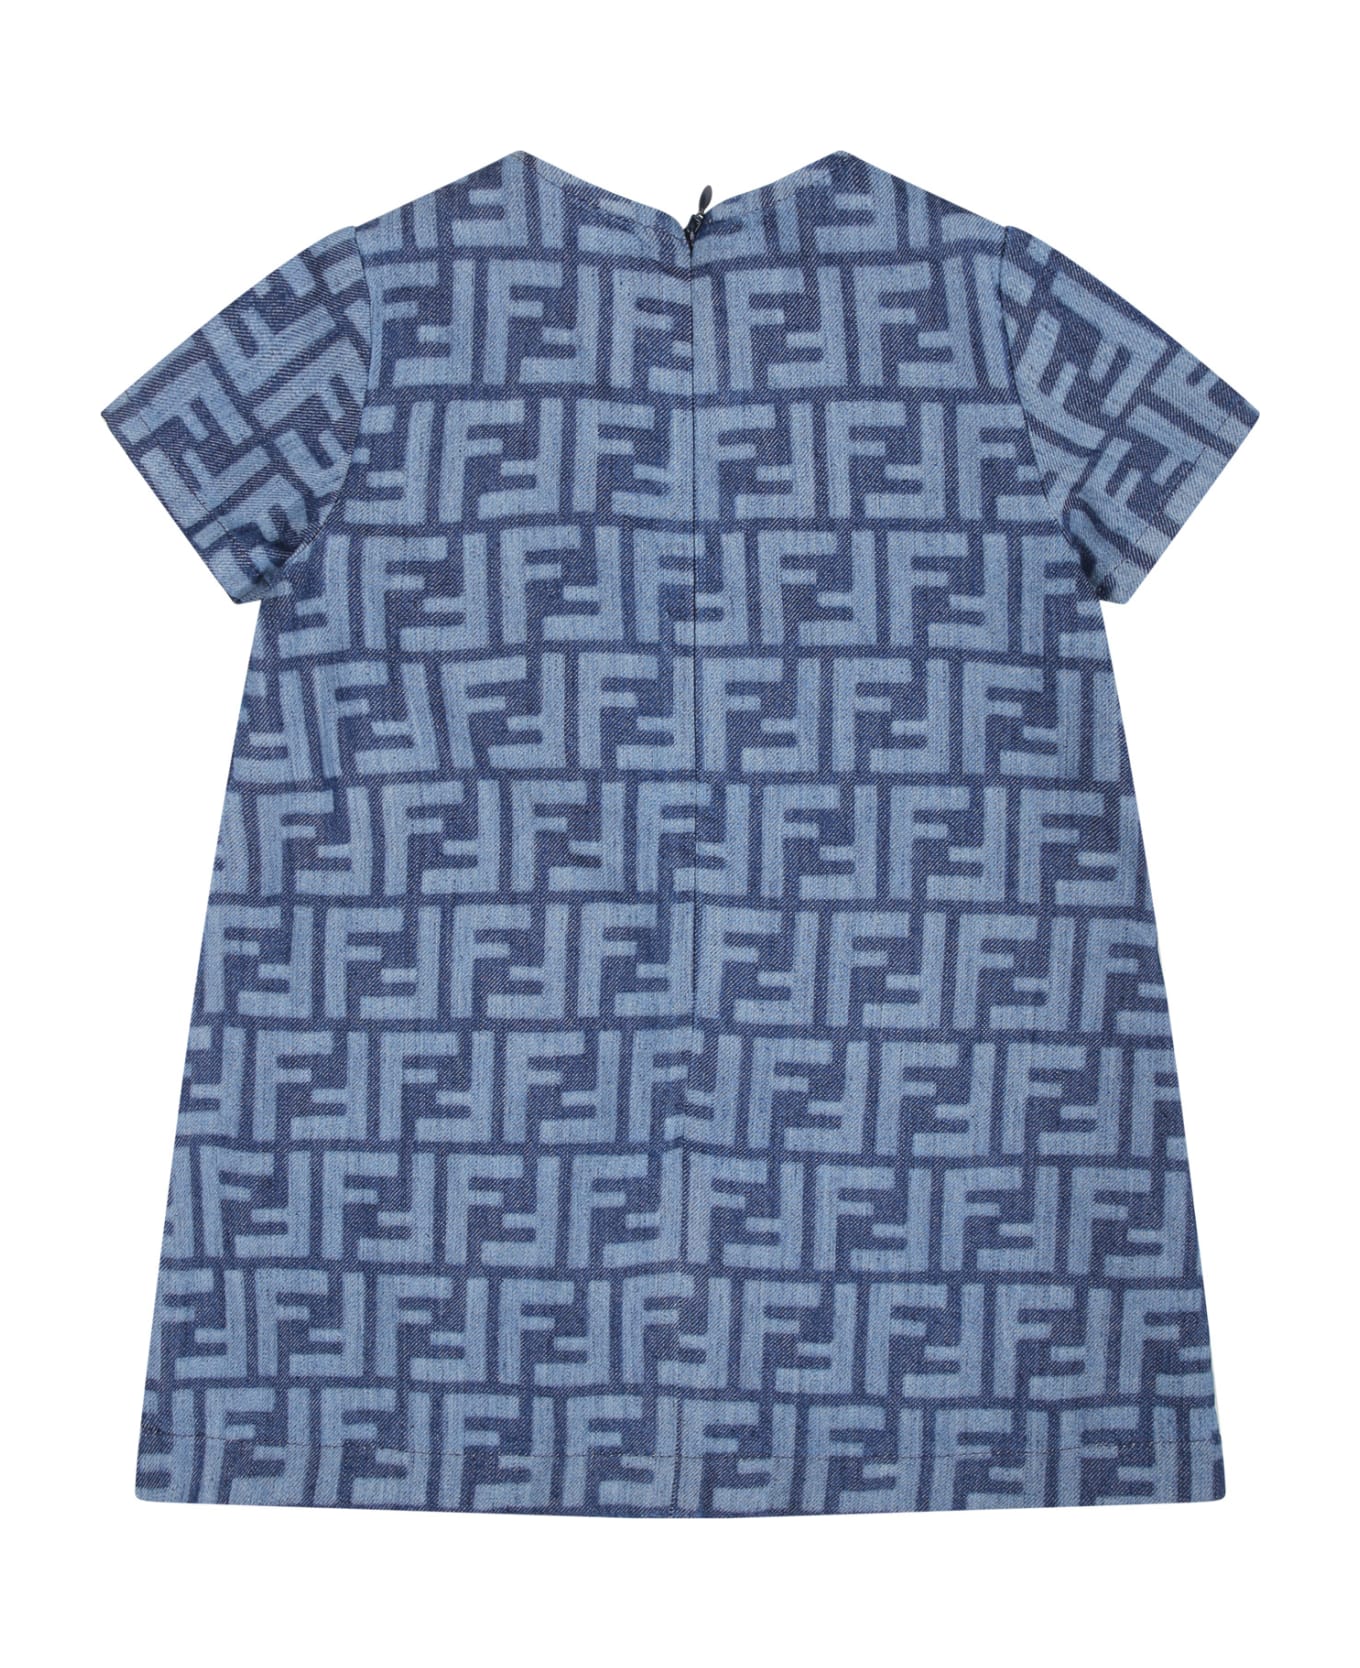 Fendi Denim Dress For Baby Girl With All-over Iconic Ff - Denim